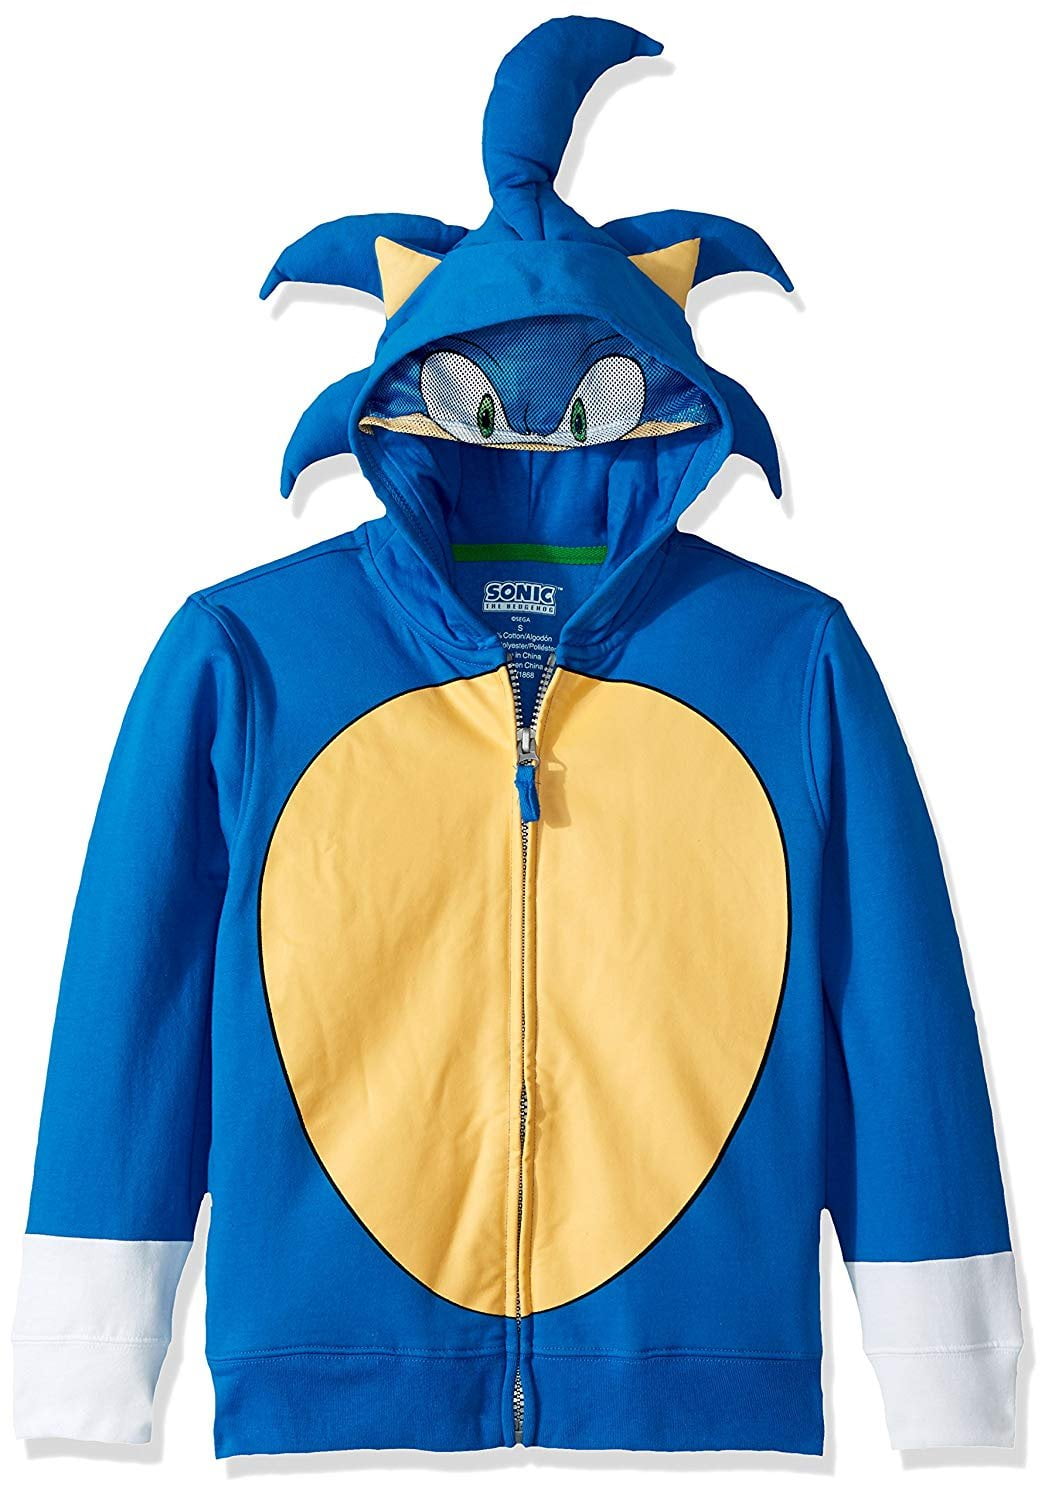 Boys Sonic The Hedgehog Hoodies Tracksuit Top Size 2 3 4 5 6 7 8 Years Casual 